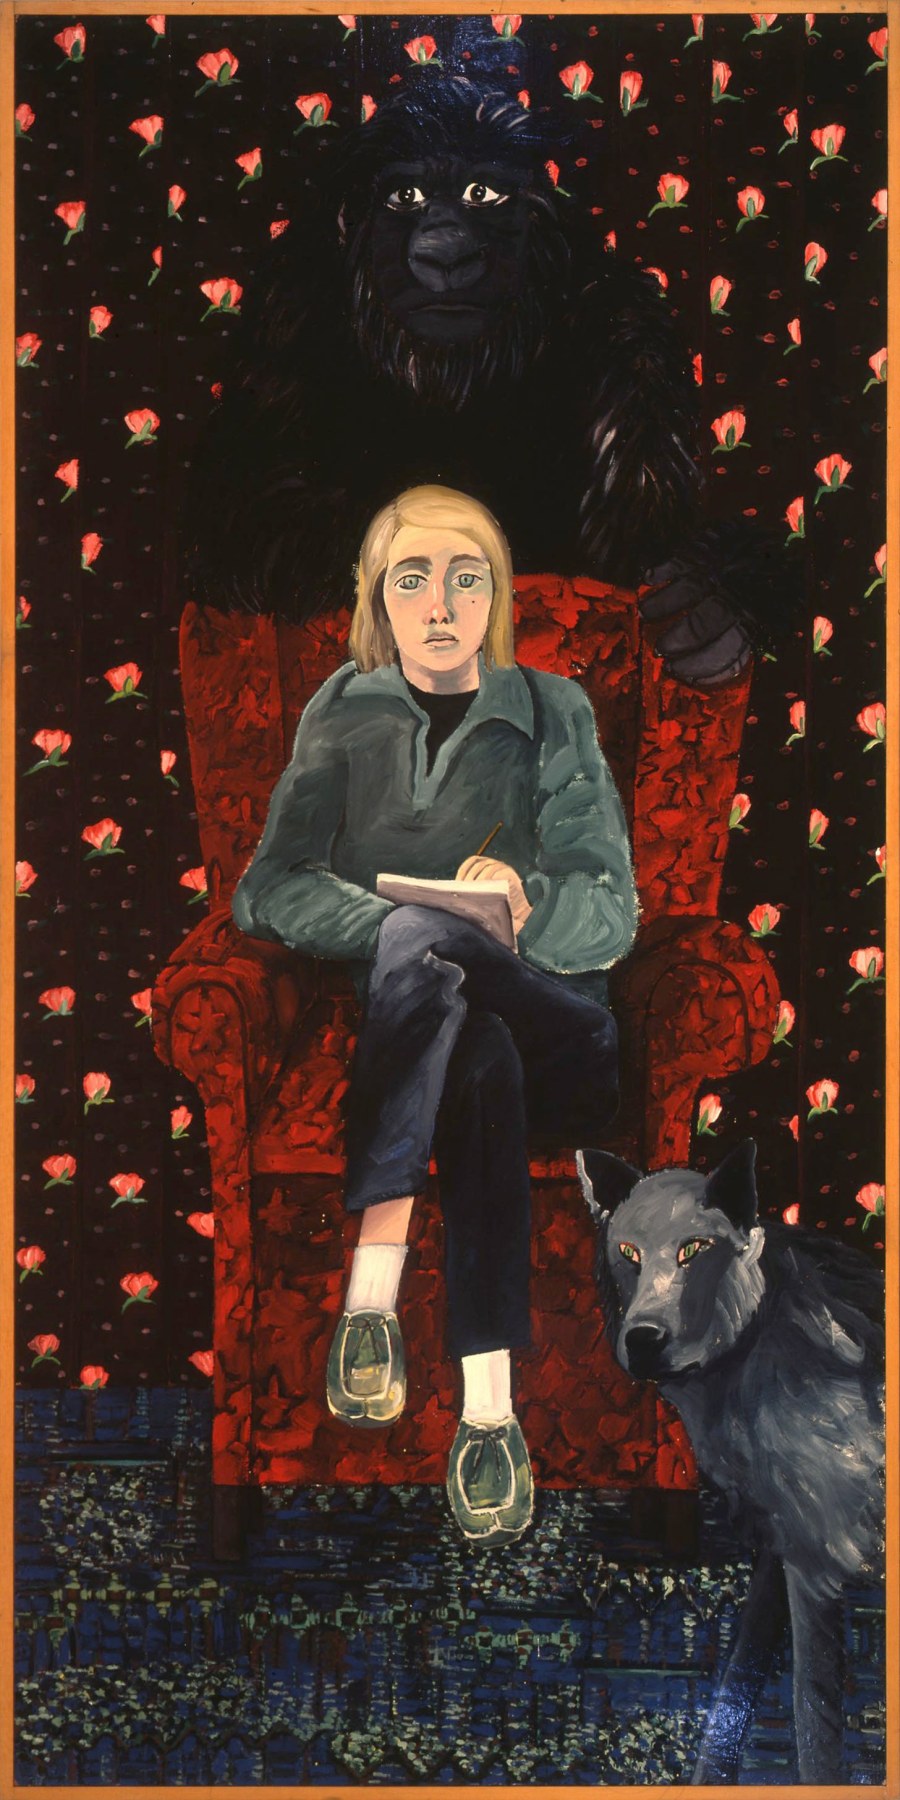 Joan Brown, Self-Portrait with Gorilla and Wolf, 1971. Enamel on masonite, 96 x 48 inches.

Collection of the Norton Museum of Art, West Palm Beach, FL.